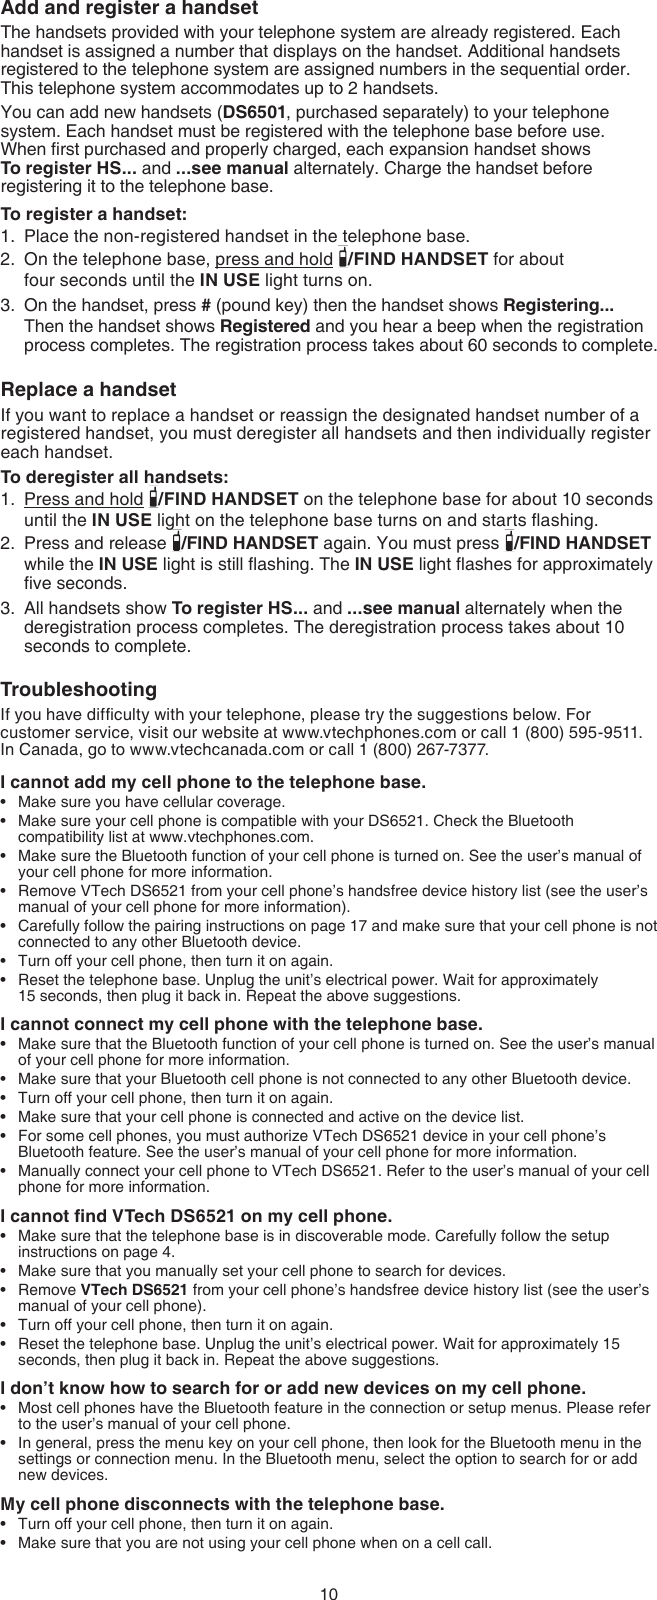 10Add and register a handsetThe handsets provided with your telephone system are already registered. Each handset is assigned a number that displays on the handset. Additional handsets registered to the telephone system are assigned numbers in the sequential order. This telephone system accommodates up to 2 handsets.You can add new handsets (DS6501, purchased separately) to your telephone system. Each handset must be registered with the telephone base before use.  When rst purchased and properly charged, each expansion handset shows  To register HS... and ...see manual alternately. Charge the handset before registering it to the telephone base.To register a handset:Place the non-registered handset in the telephone base.On the telephone base, press and hold  /FIND HANDSET for about  four seconds until the IN USE light turns on.On the handset, press # (pound key) then the handset shows Registering... Then the handset shows Registered and you hear a beep when the registration process completes. The registration process takes about 60 seconds to complete.Replace a handsetIf you want to replace a handset or reassign the designated handset number of a registered handset, you must deregister all handsets and then individually register each handset.To deregister all handsets:Press and hold  /FIND HANDSET on the telephone base for about 10 seconds until the IN USE light on the telephone base turns on and starts ashing.Press and release  /FIND HANDSET again. You must press  /FIND HANDSET while the IN USE light is still ashing. The IN USE light ashes for approximately ve seconds.All handsets show To register HS... and ...see manual alternately when the deregistration process completes. The deregistration process takes about 10 seconds to complete.TroubleshootingIf you have difculty with your telephone, please try the suggestions below. For customer service, visit our website at www.vtechphones.com or call 1 (800) 595-9511. In Canada, go to www.vtechcanada.com or call 1 (800) 267-7377.I cannot add my cell phone to the telephone base.Make sure you have cellular coverage.Make sure your cell phone is compatible with your DS6521. Check the Bluetooth compatibility list at www.vtechphones.com.Make sure the Bluetooth function of your cell phone is turned on. See the user’s manual of your cell phone for more information.Remove VTech DS6521 from your cell phone’s handsfree device history list (see the user’s manual of your cell phone for more information).Carefully follow the pairing instructions on page 17 and make sure that your cell phone is not connected to any other Bluetooth device.Turn off your cell phone, then turn it on again.Reset the telephone base. Unplug the unit’s electrical power. Wait for approximately  15 seconds, then plug it back in. Repeat the above suggestions.I cannot connect my cell phone with the telephone base.Make sure that the Bluetooth function of your cell phone is turned on. See the user’s manual of your cell phone for more information.Make sure that your Bluetooth cell phone is not connected to any other Bluetooth device.Turn off your cell phone, then turn it on again.Make sure that your cell phone is connected and active on the device list.For some cell phones, you must authorize VTech DS6521 device in your cell phone’s Bluetooth feature. See the user’s manual of your cell phone for more information.Manually connect your cell phone to VTech DS6521. Refer to the user’s manual of your cell phone for more information.I cannot nd VTech DS6521 on my cell phone.Make sure that the telephone base is in discoverable mode. Carefully follow the setup instructions on page 4.Make sure that you manually set your cell phone to search for devices.Remove VTech DS6521 from your cell phone’s handsfree device history list (see the user’s manual of your cell phone).Turn off your cell phone, then turn it on again.Reset the telephone base. Unplug the unit’s electrical power. Wait for approximately 15 seconds, then plug it back in. Repeat the above suggestions.I don’t know how to search for or add new devices on my cell phone.Most cell phones have the Bluetooth feature in the connection or setup menus. Please refer to the user’s manual of your cell phone.In general, press the menu key on your cell phone, then look for the Bluetooth menu in the settings or connection menu. In the Bluetooth menu, select the option to search for or add new devices.My cell phone disconnects with the telephone base.Turn off your cell phone, then turn it on again.Make sure that you are not using your cell phone when on a cell call.1.2.3.1.2.3.••••••••••••••••••••••